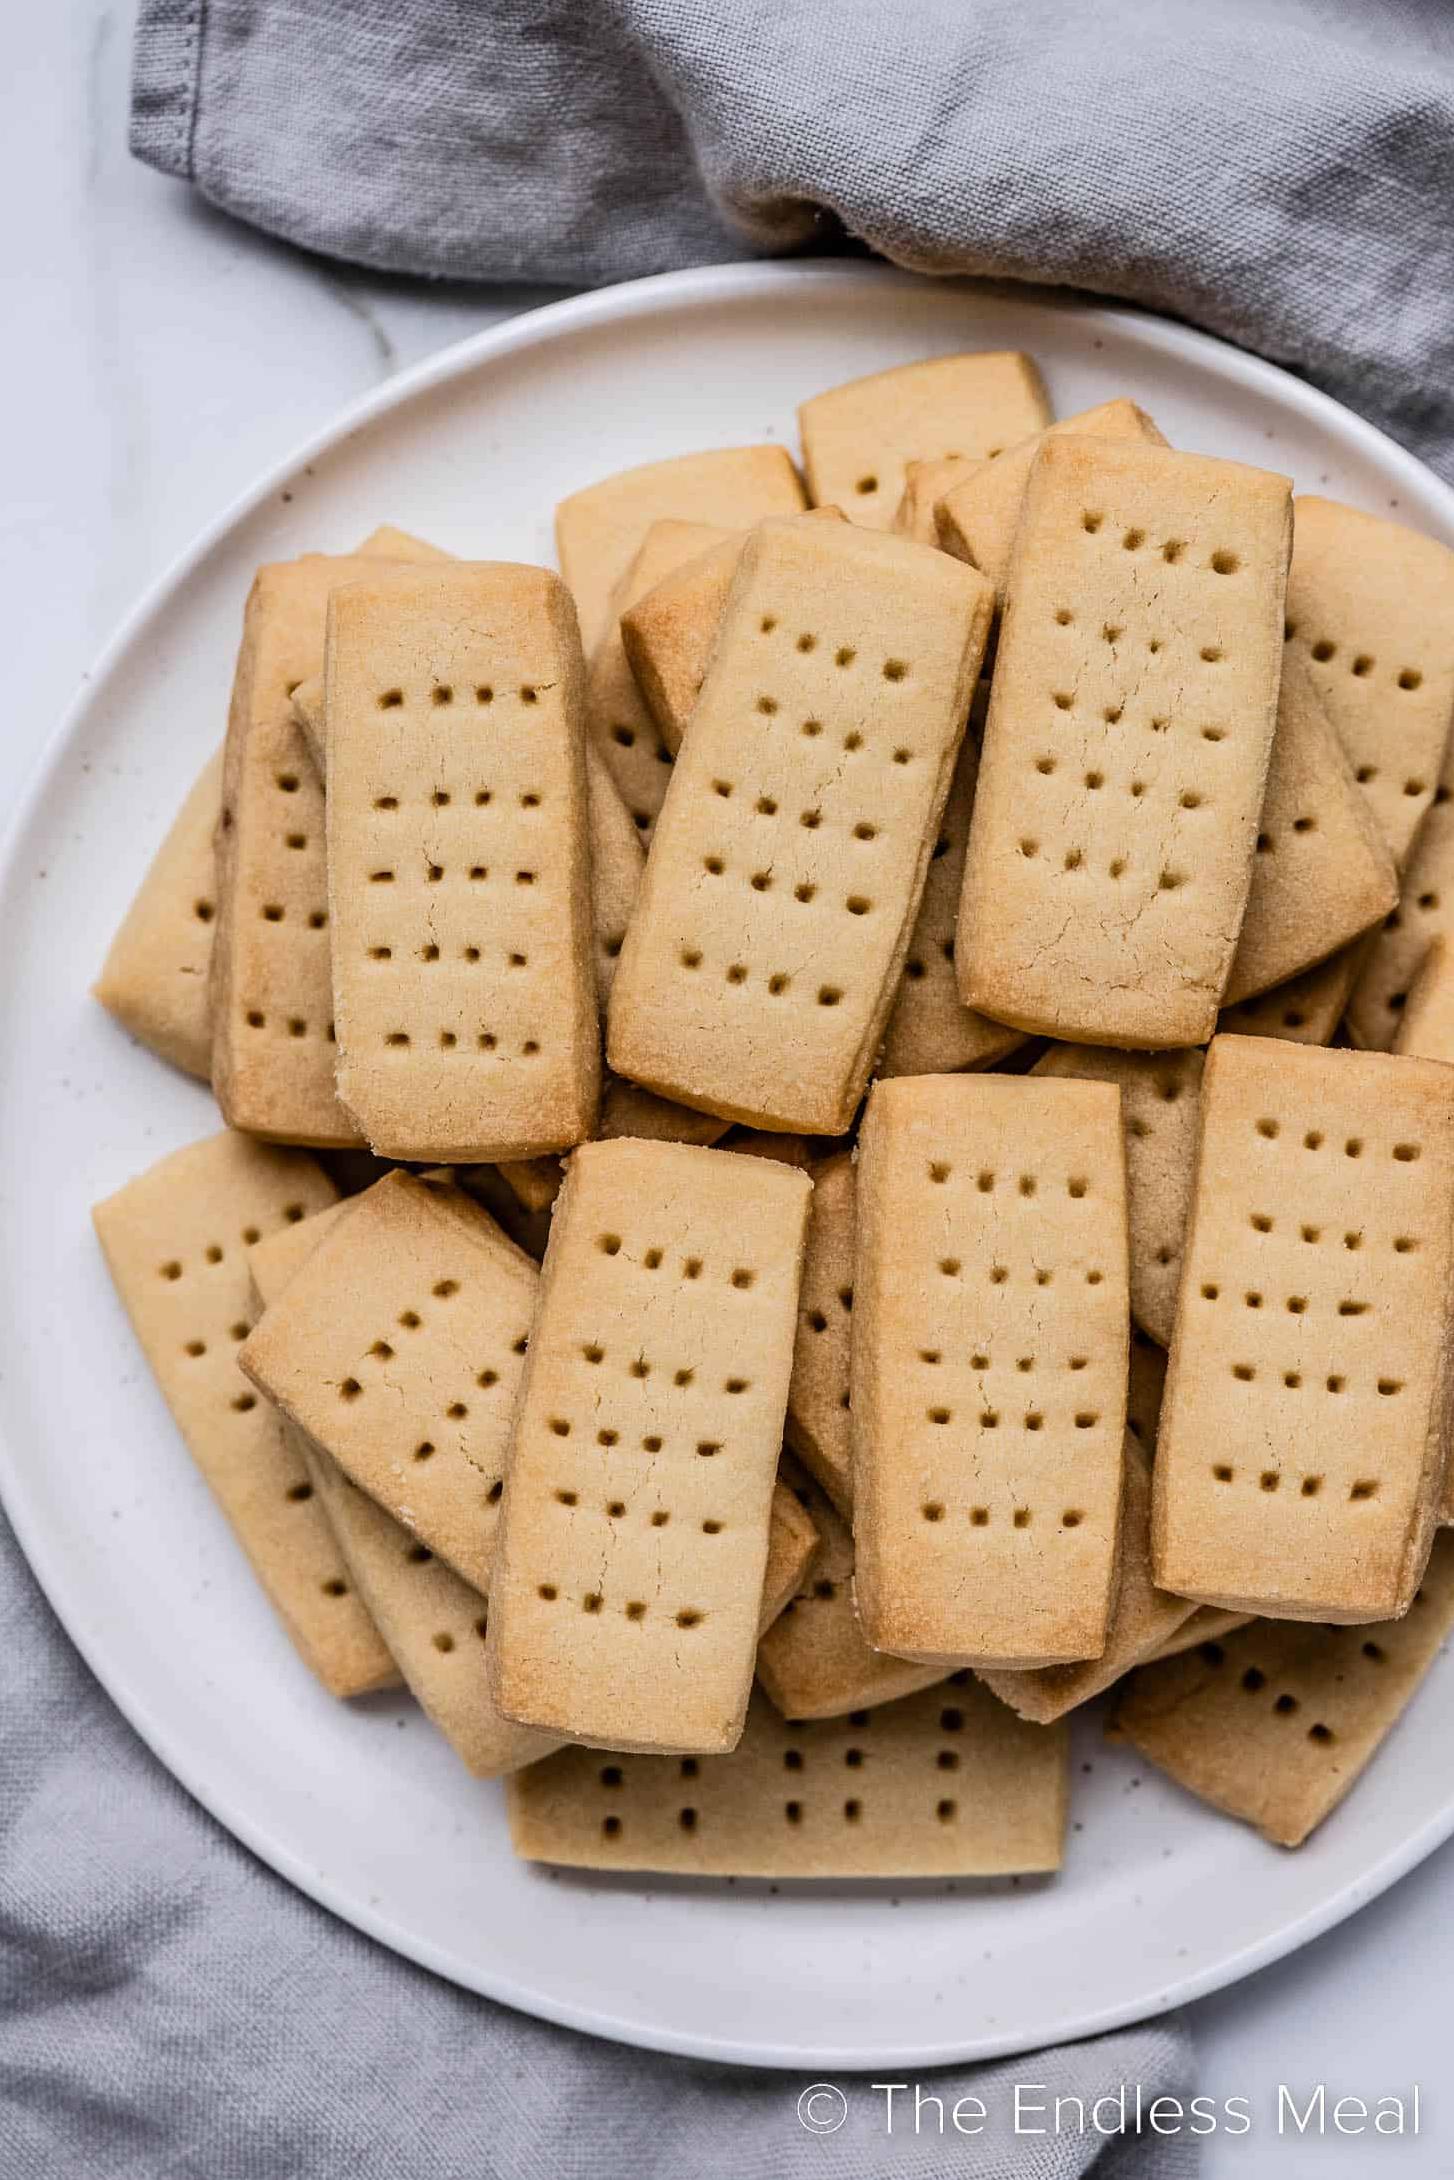  Crunchy and buttery, this shortbread is pure heaven.